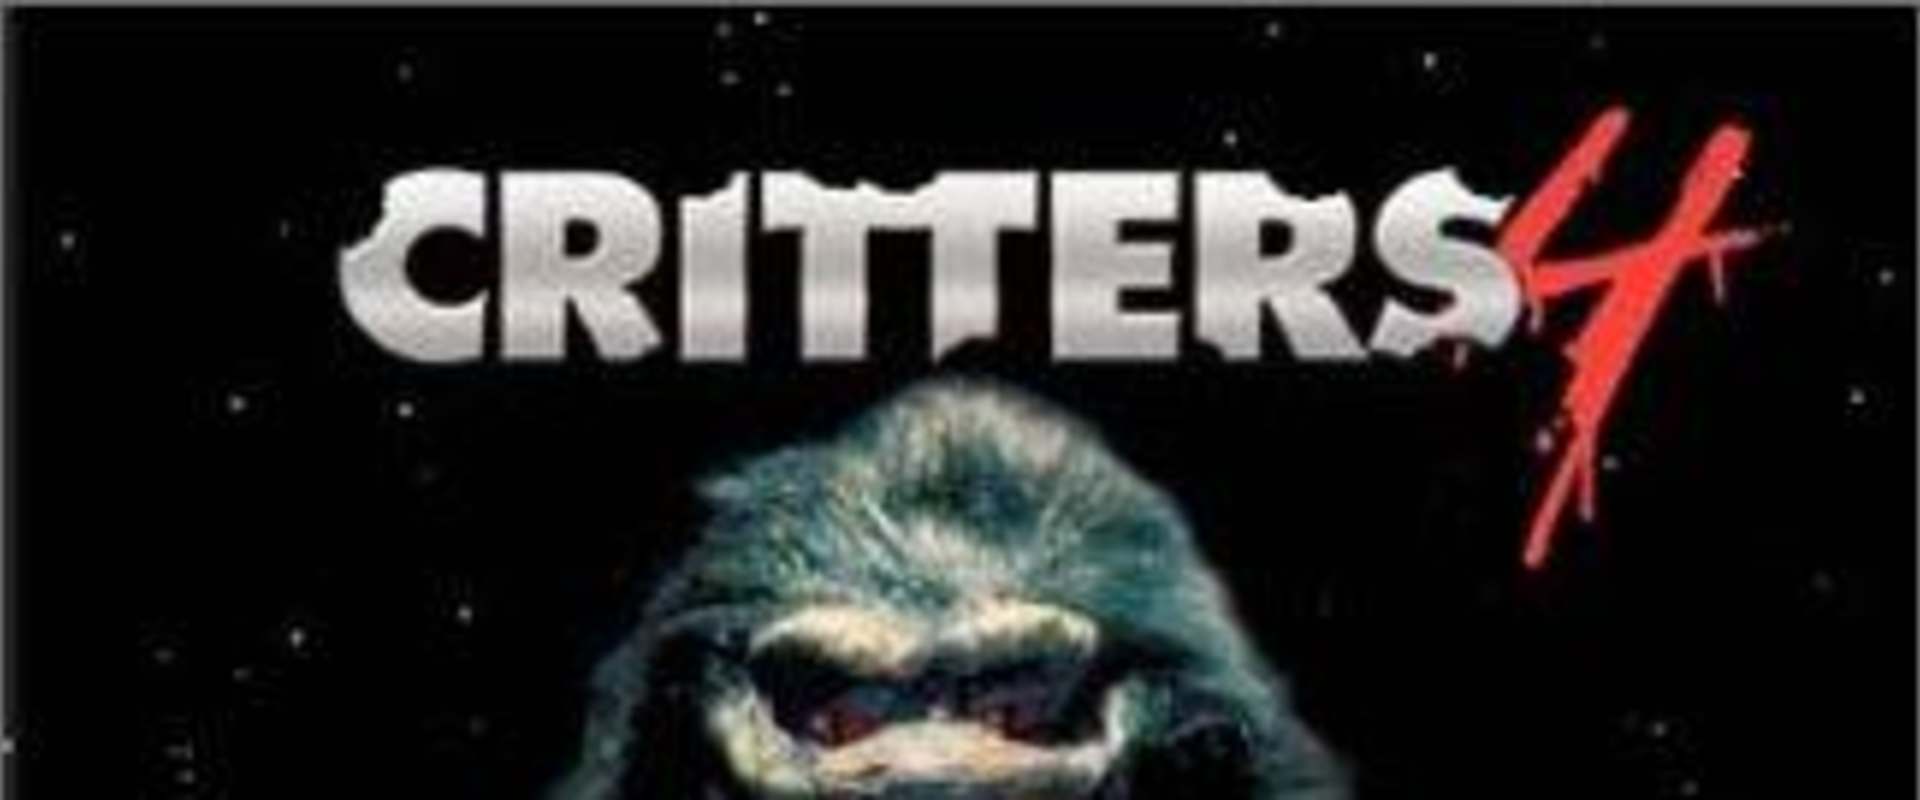 Critters 4 background 2